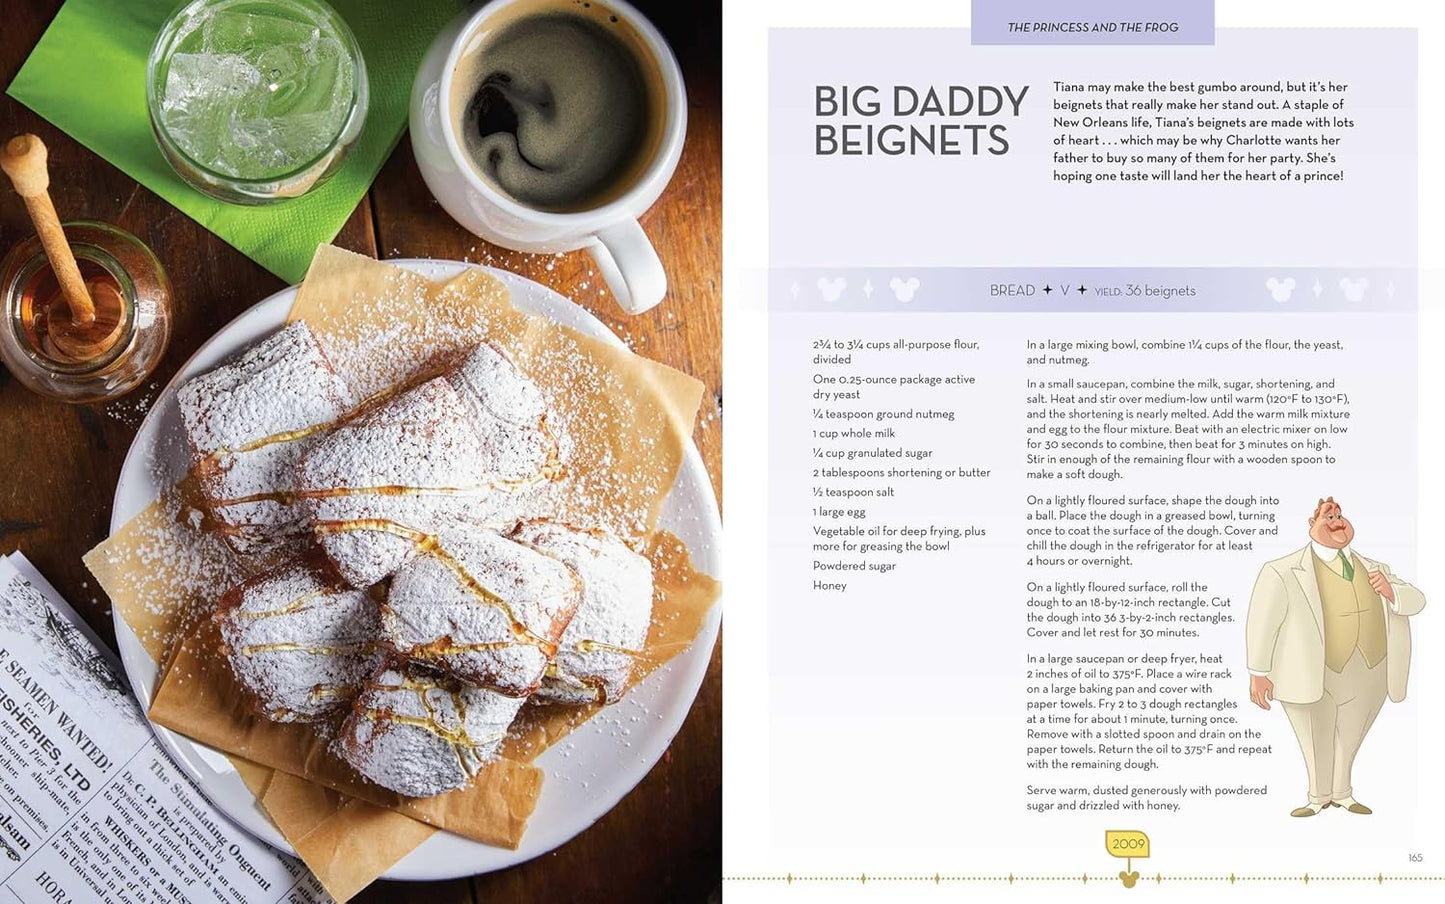 Load image into Gallery viewer, A two-page spread from the book. On the left is a plate of beignets on a plate, covered in powdered sugar. Around the plate are a mug of coffee, a glass of water, and a jar of honey. On the right is a recipe for Big Daddy Beignets.
